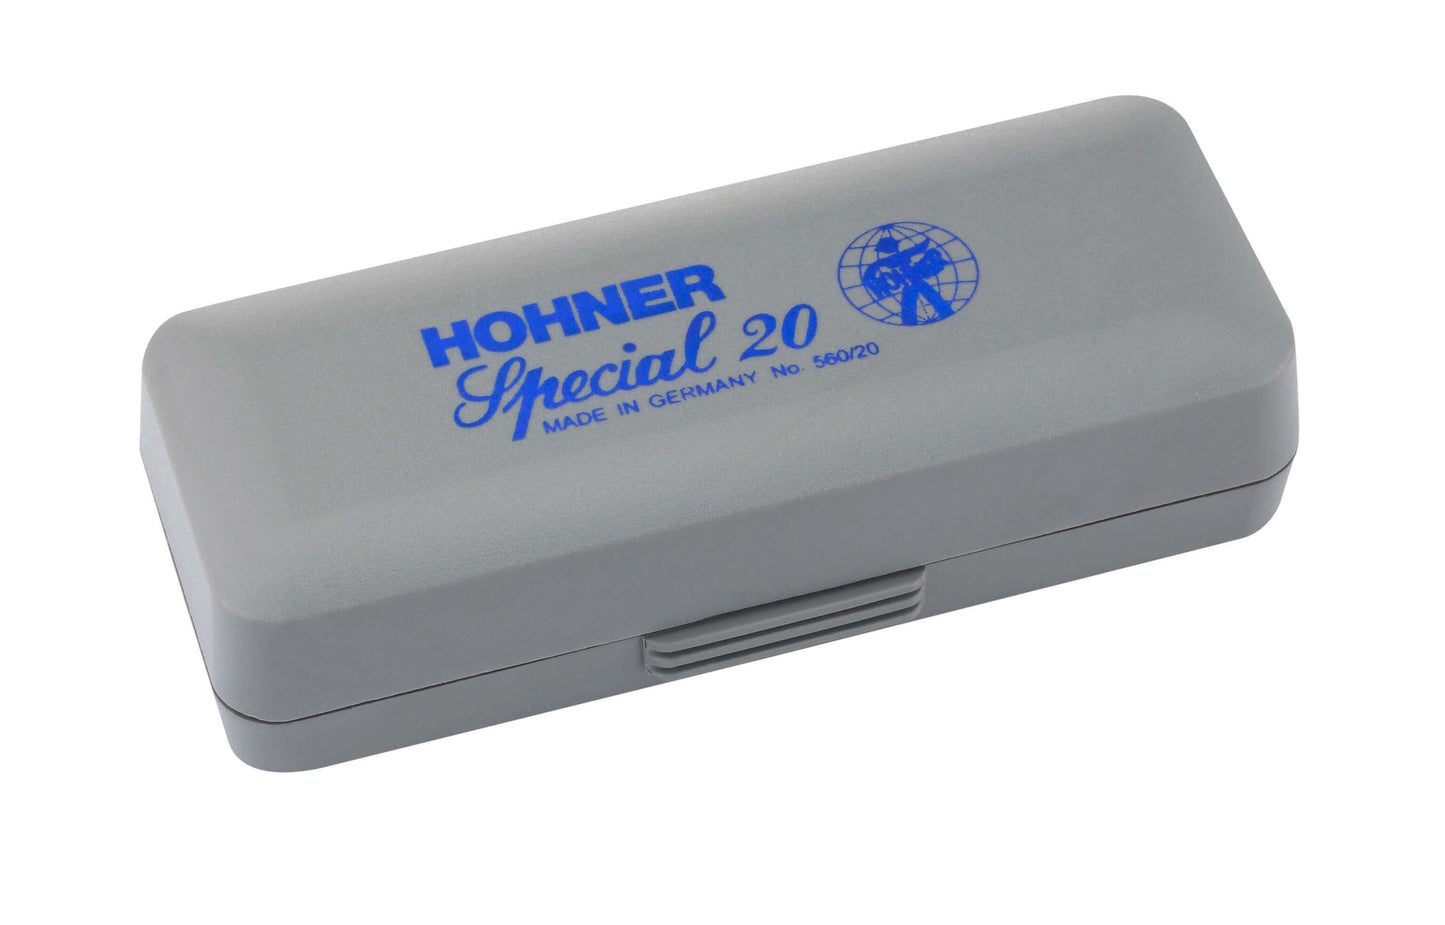 SPECIAL 20 HARMONICA BOXED KEY OF Bb